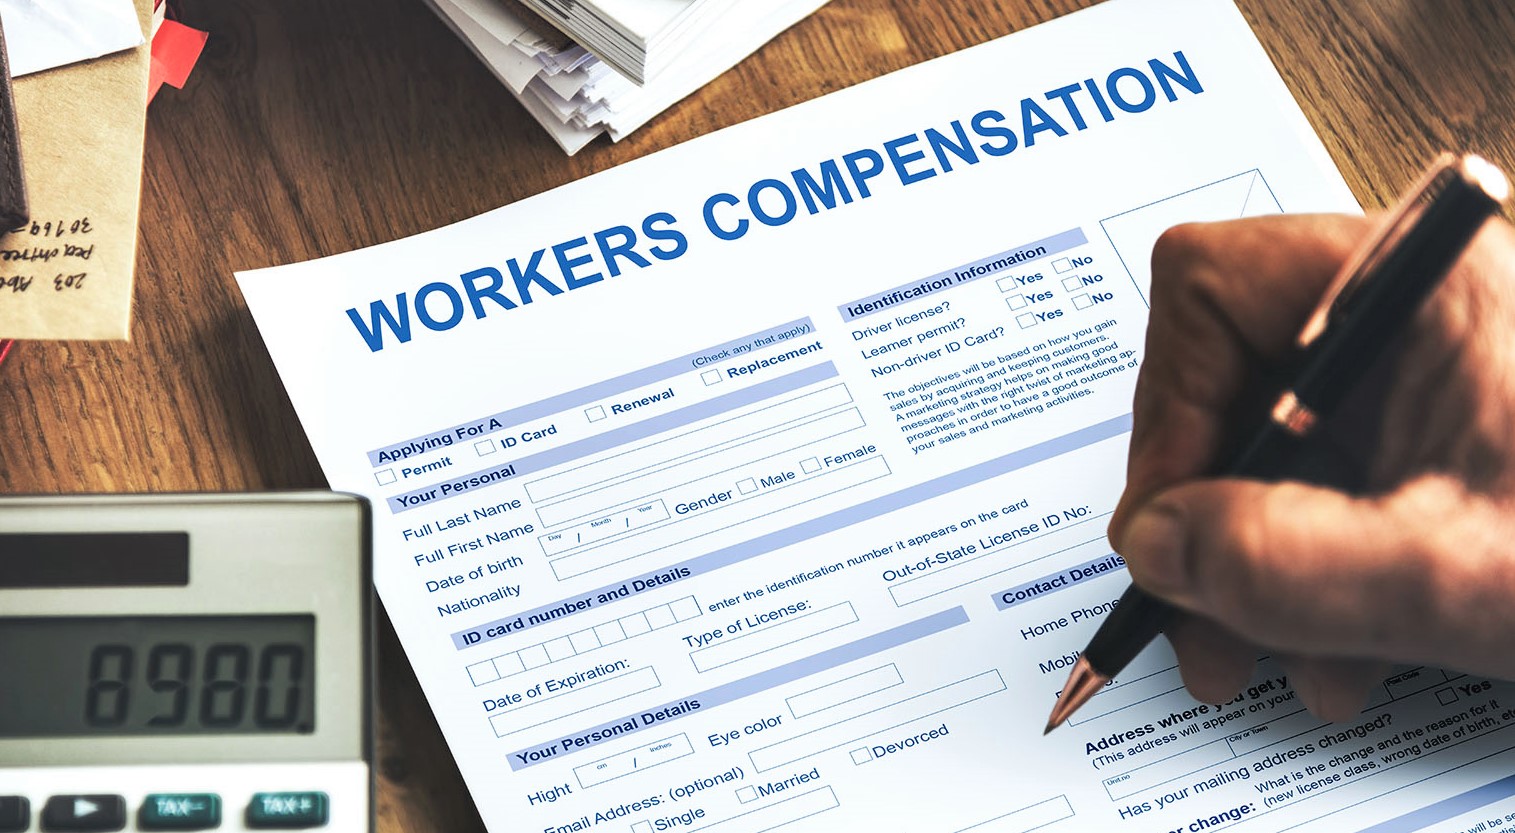 How to Reduce Workers' Compensation Costs